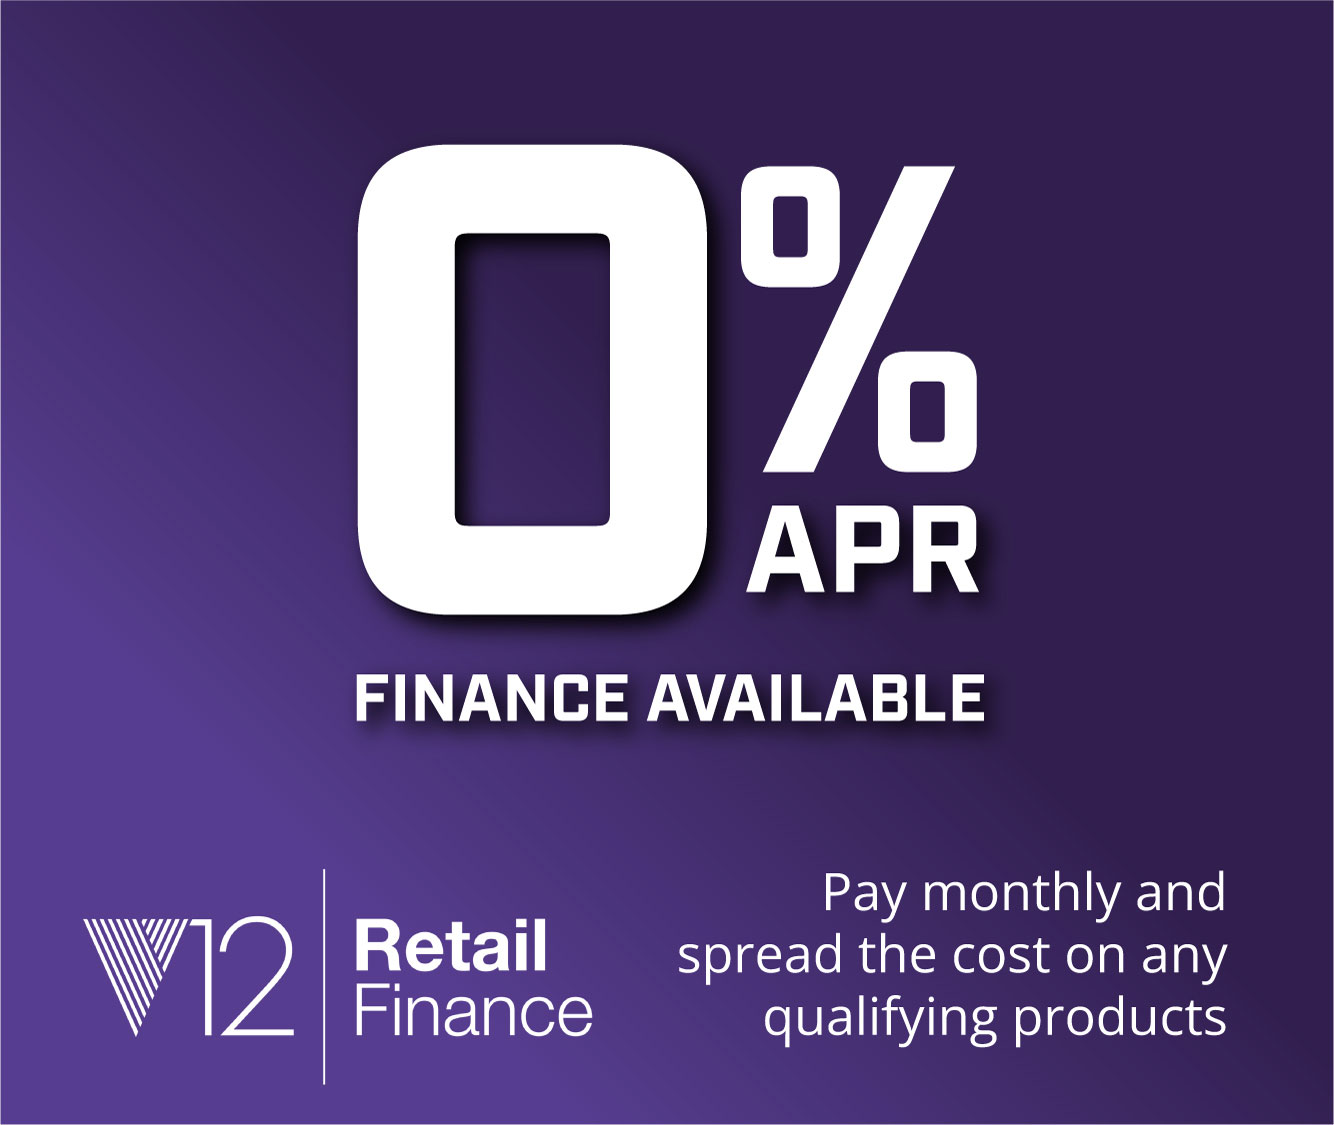 0% APR Finance Available - V12 Retail Finance - Pay monthly and spread the cost on any qualifying products